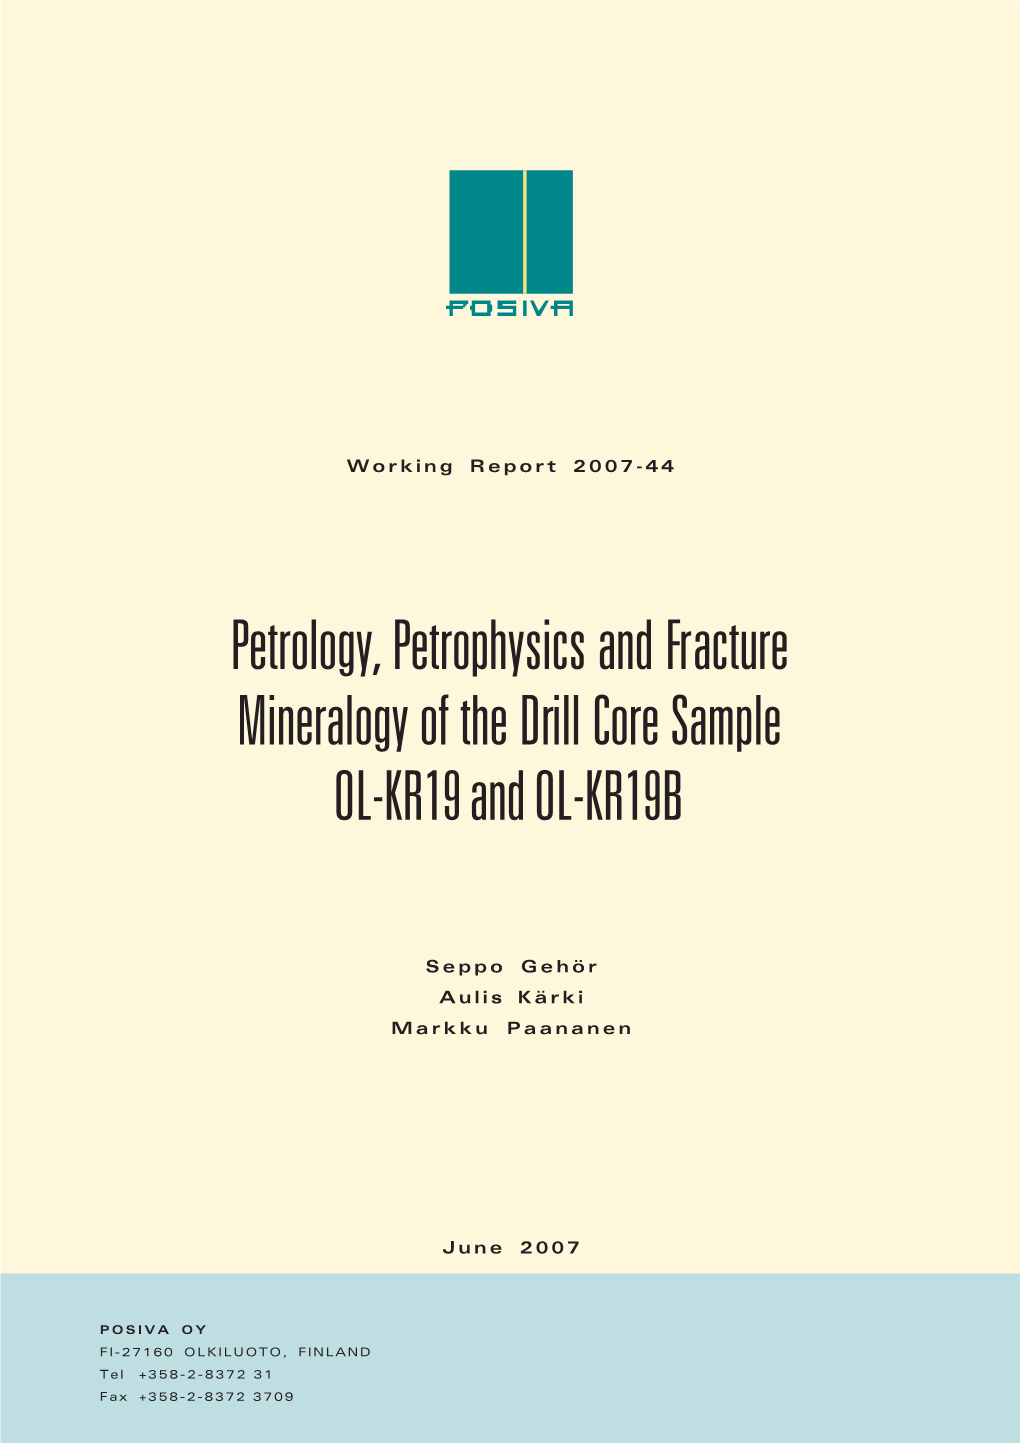 Petrology, Petrophysics and Fracture Mineralogy of the Drill Core Sample OL-KR19 and OL-KR19B